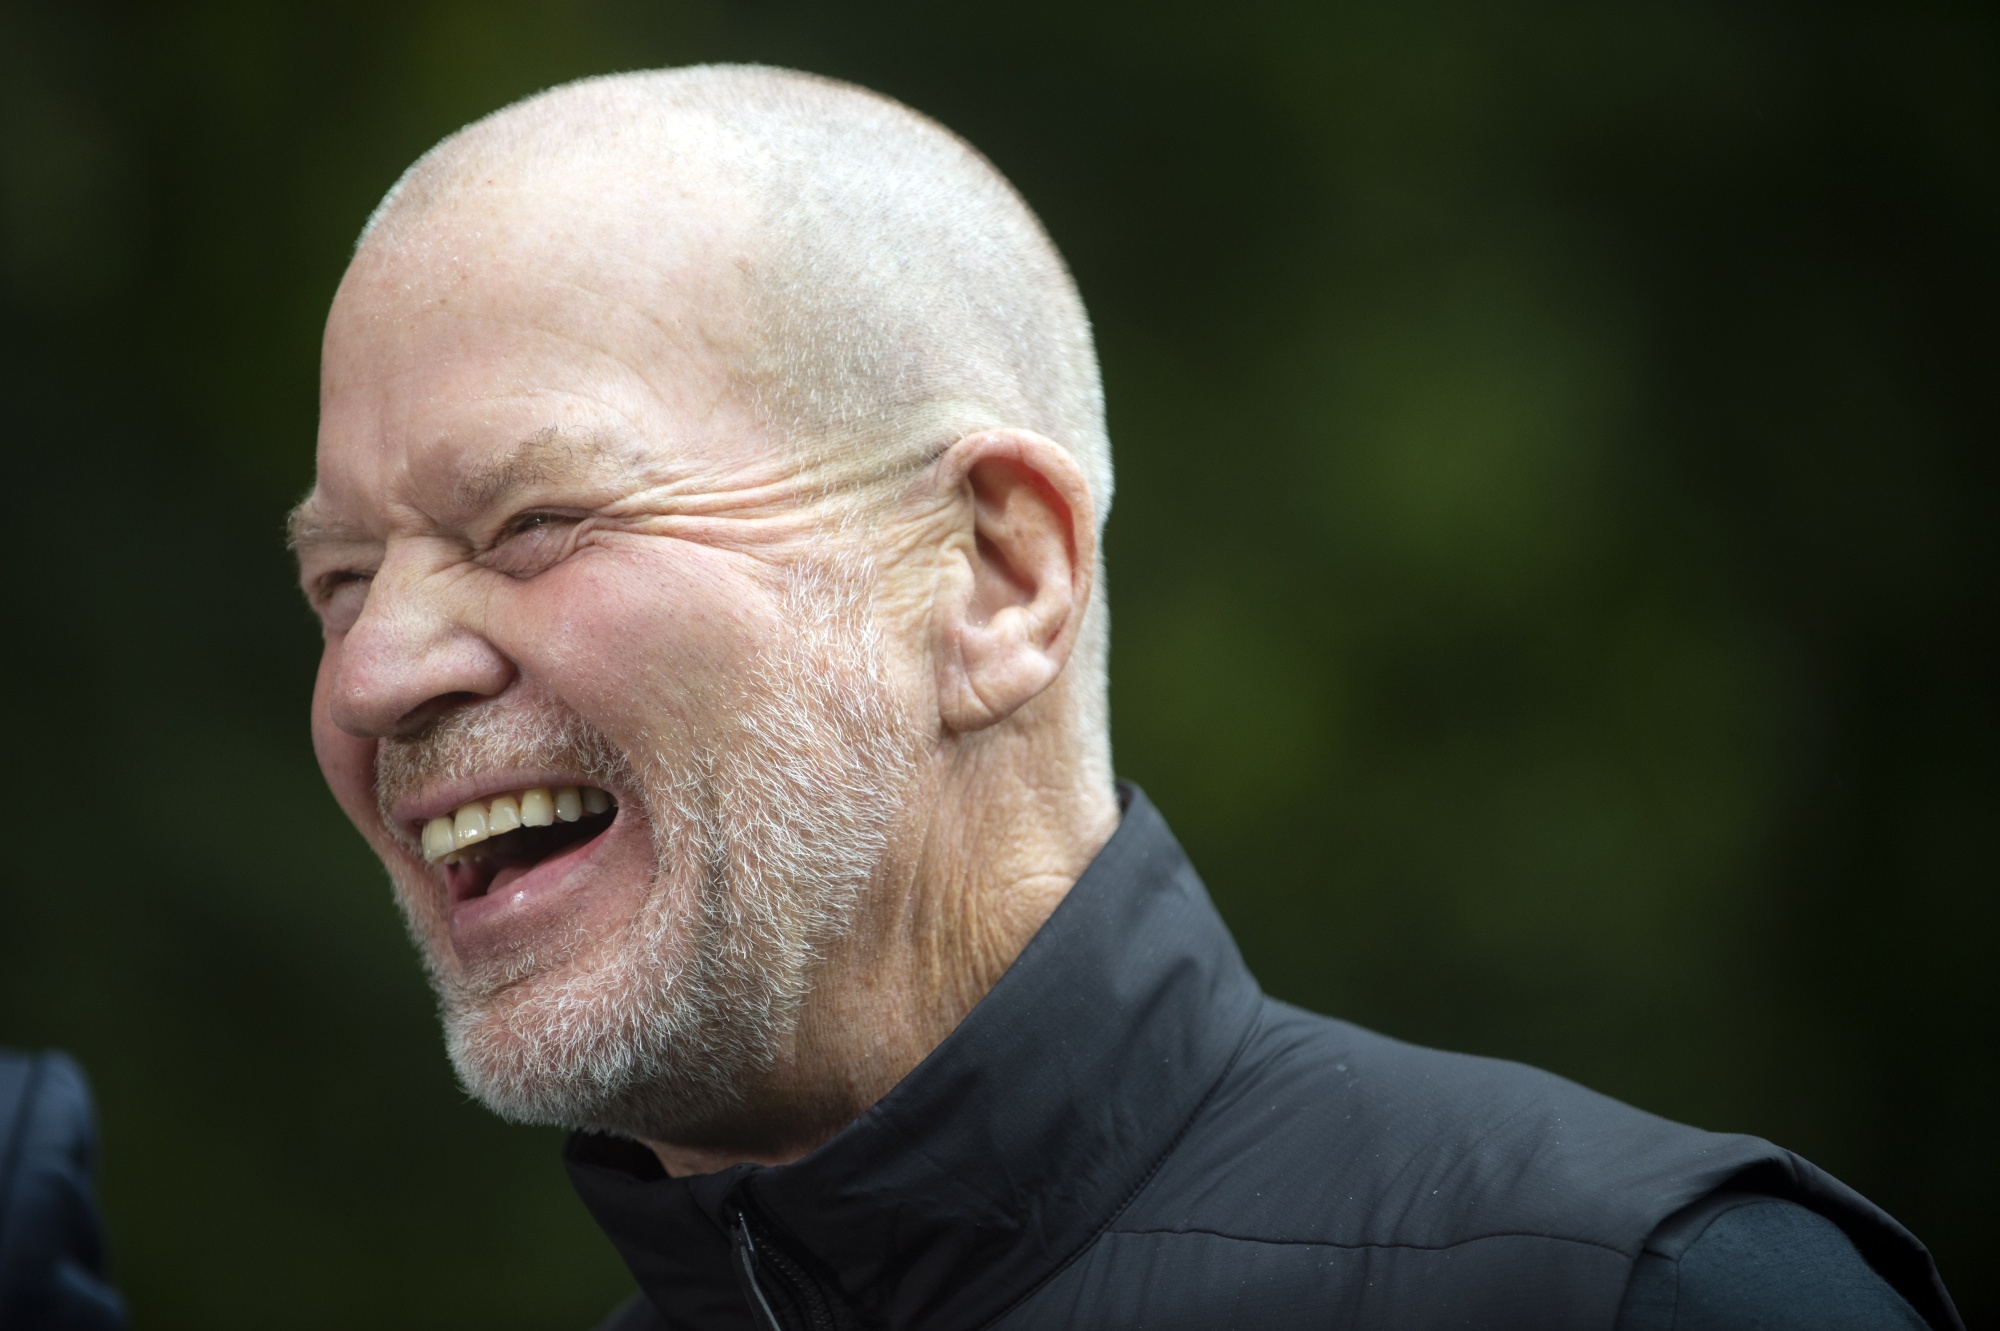 $100 million gift by Lululemon founder Chip Wilson to fund